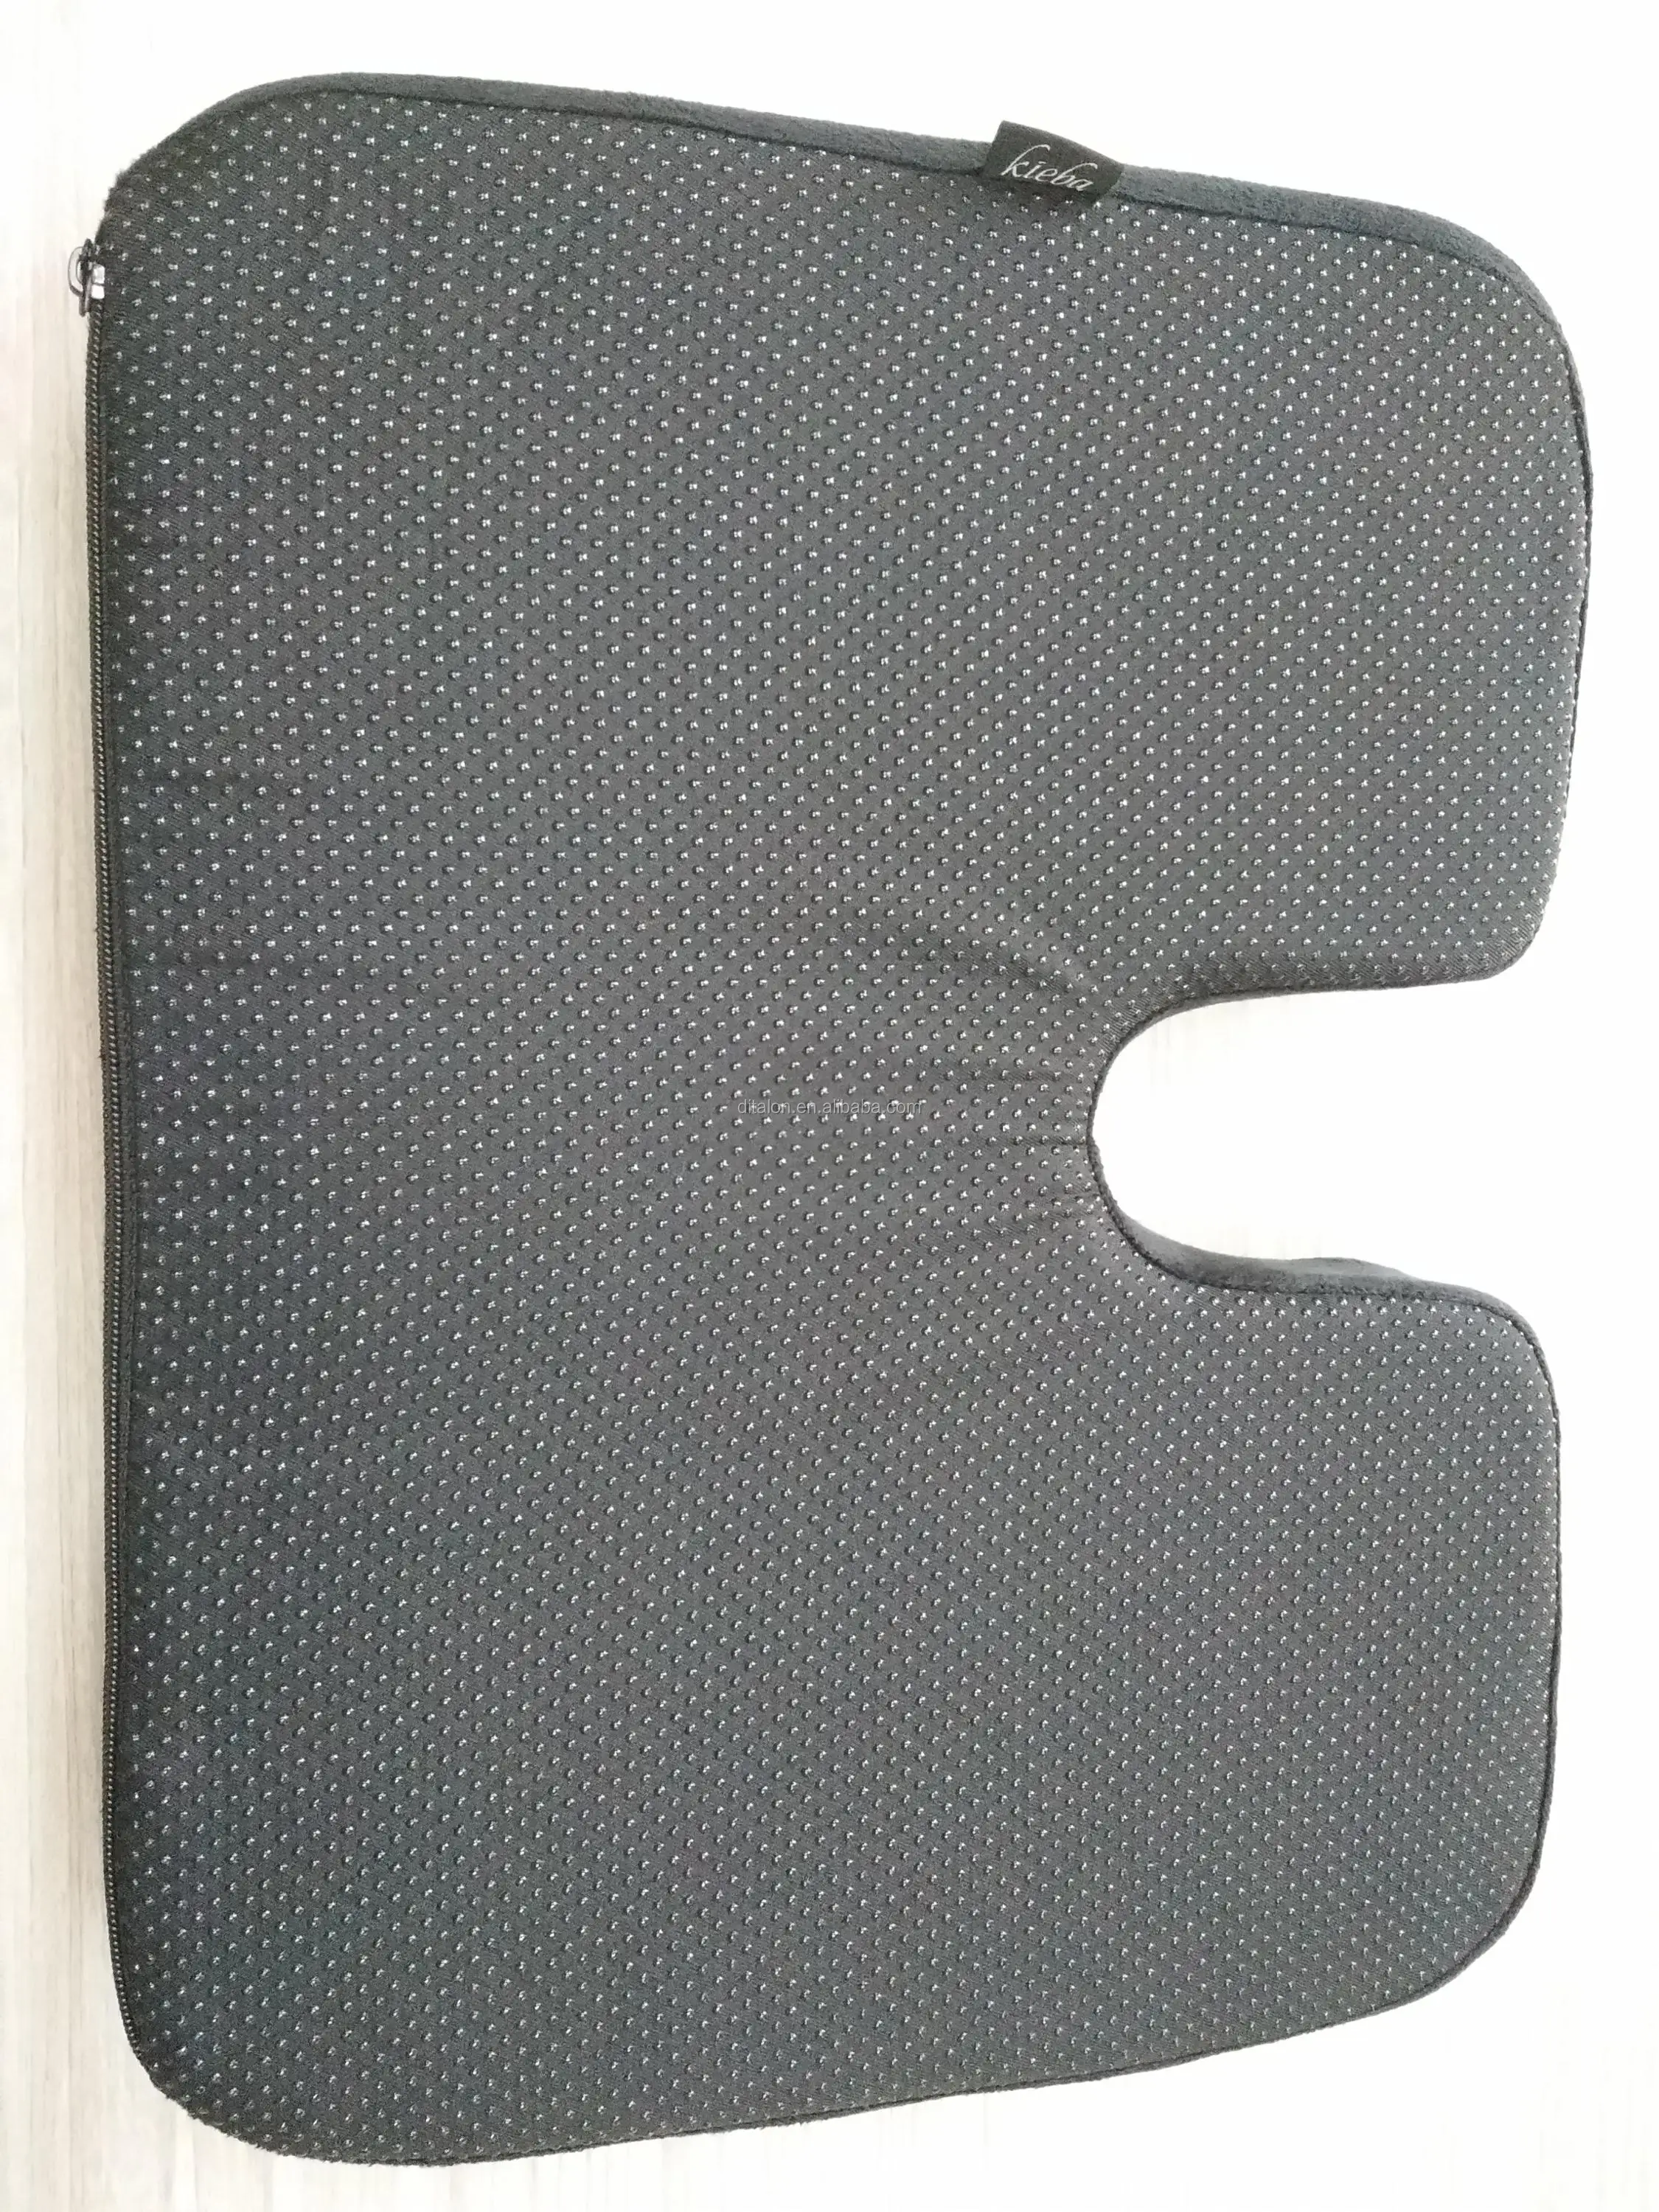 100% Polyester Material And Plain Style Gel Foam Seat Cushion - Buy ...